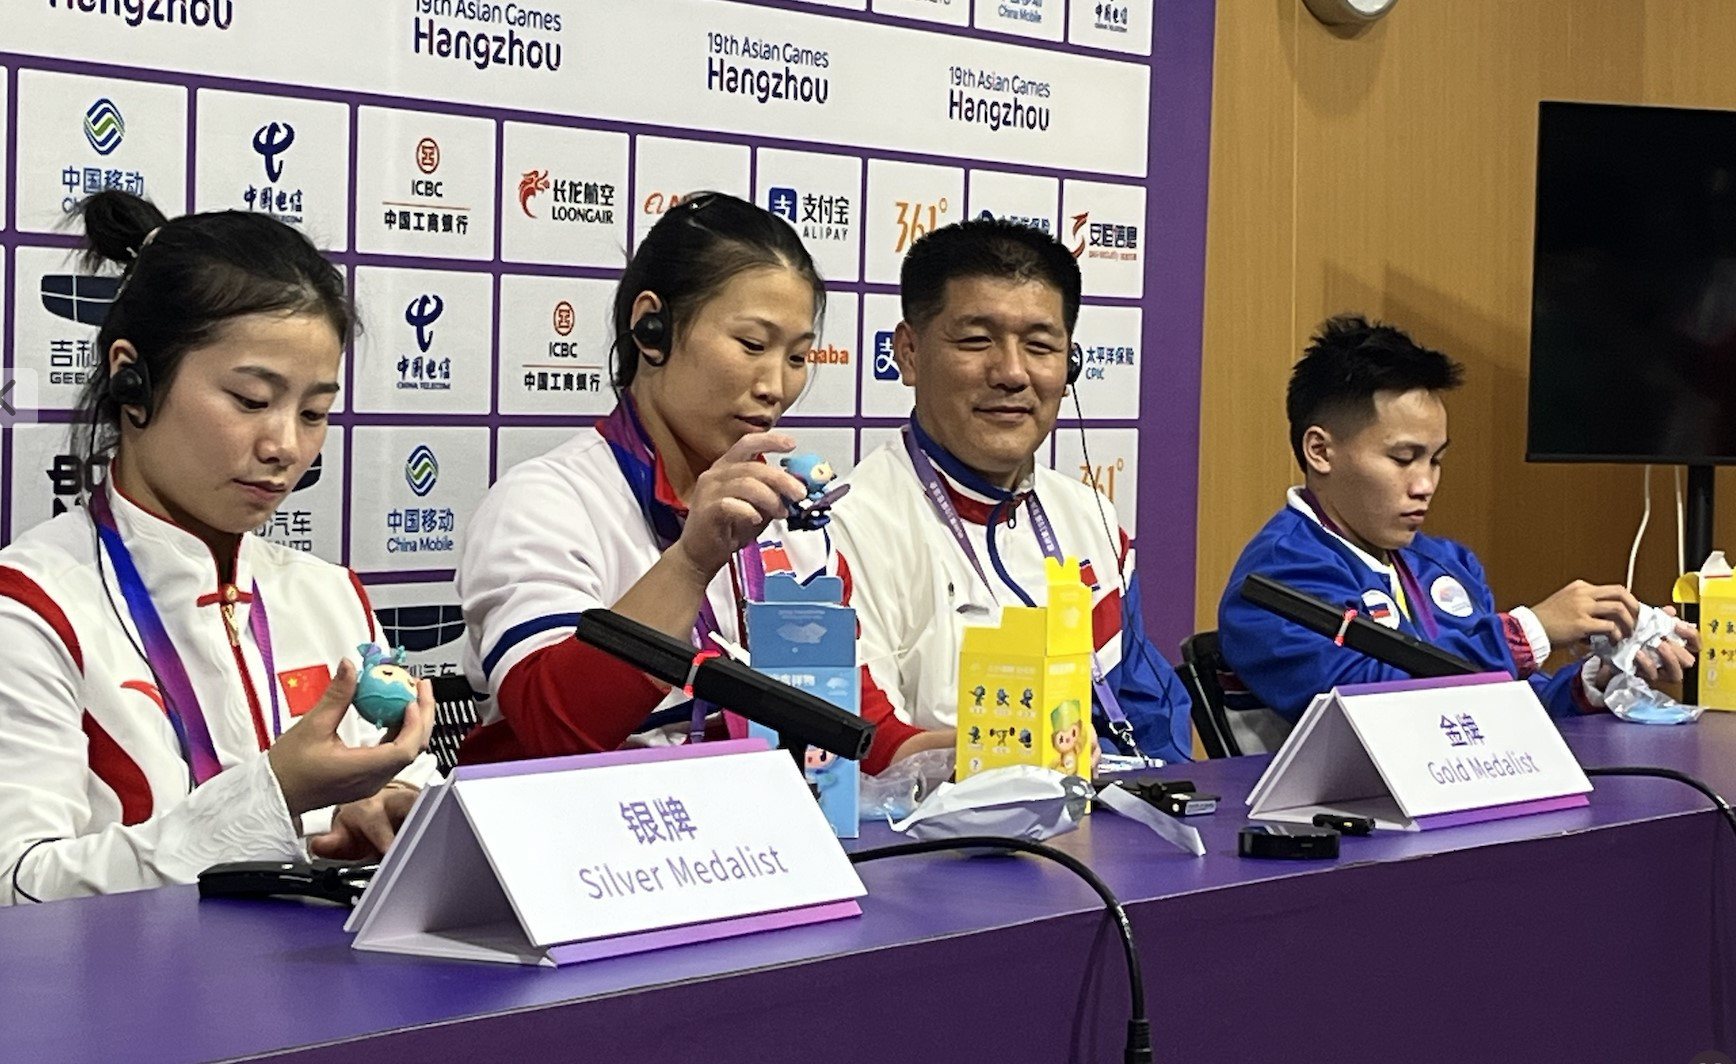 All but one of North Korea's 13 weightlifting medallists sat down to speak to the media following their performances in Hangzhou ©Getty Images